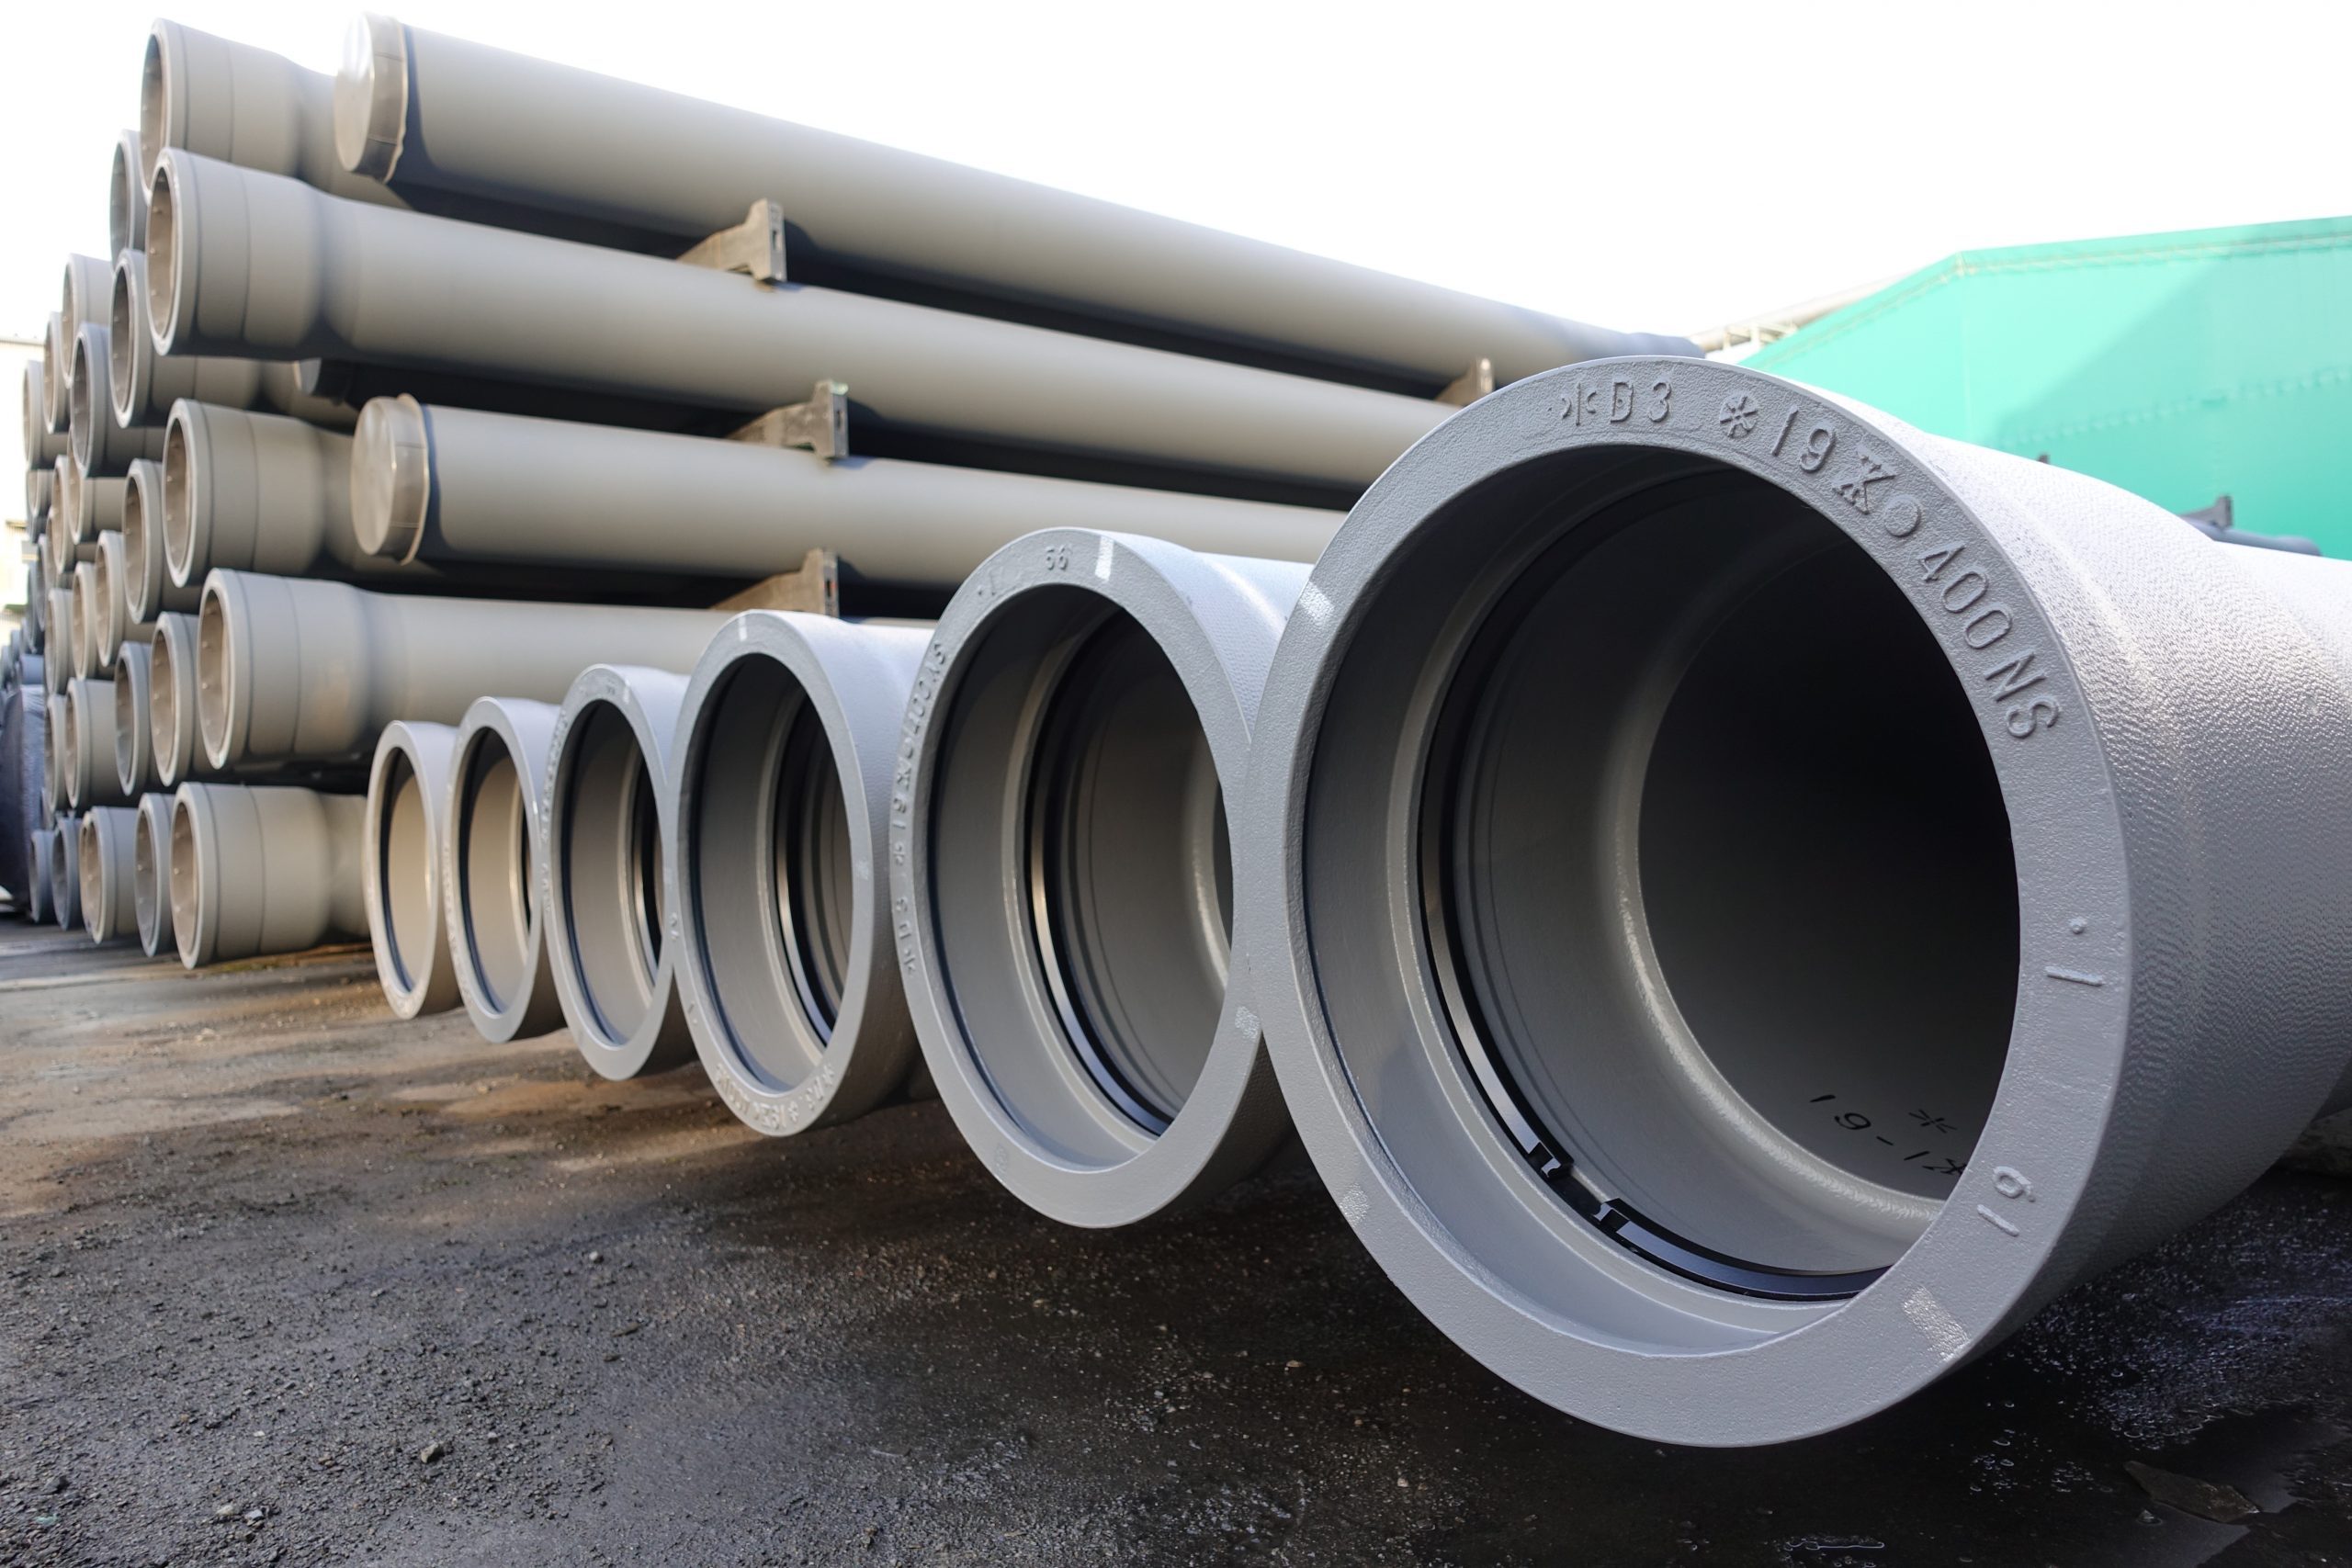 Seismic Resilient Ductile Iron Pipe - Hynds Pipe Systems Ltd.